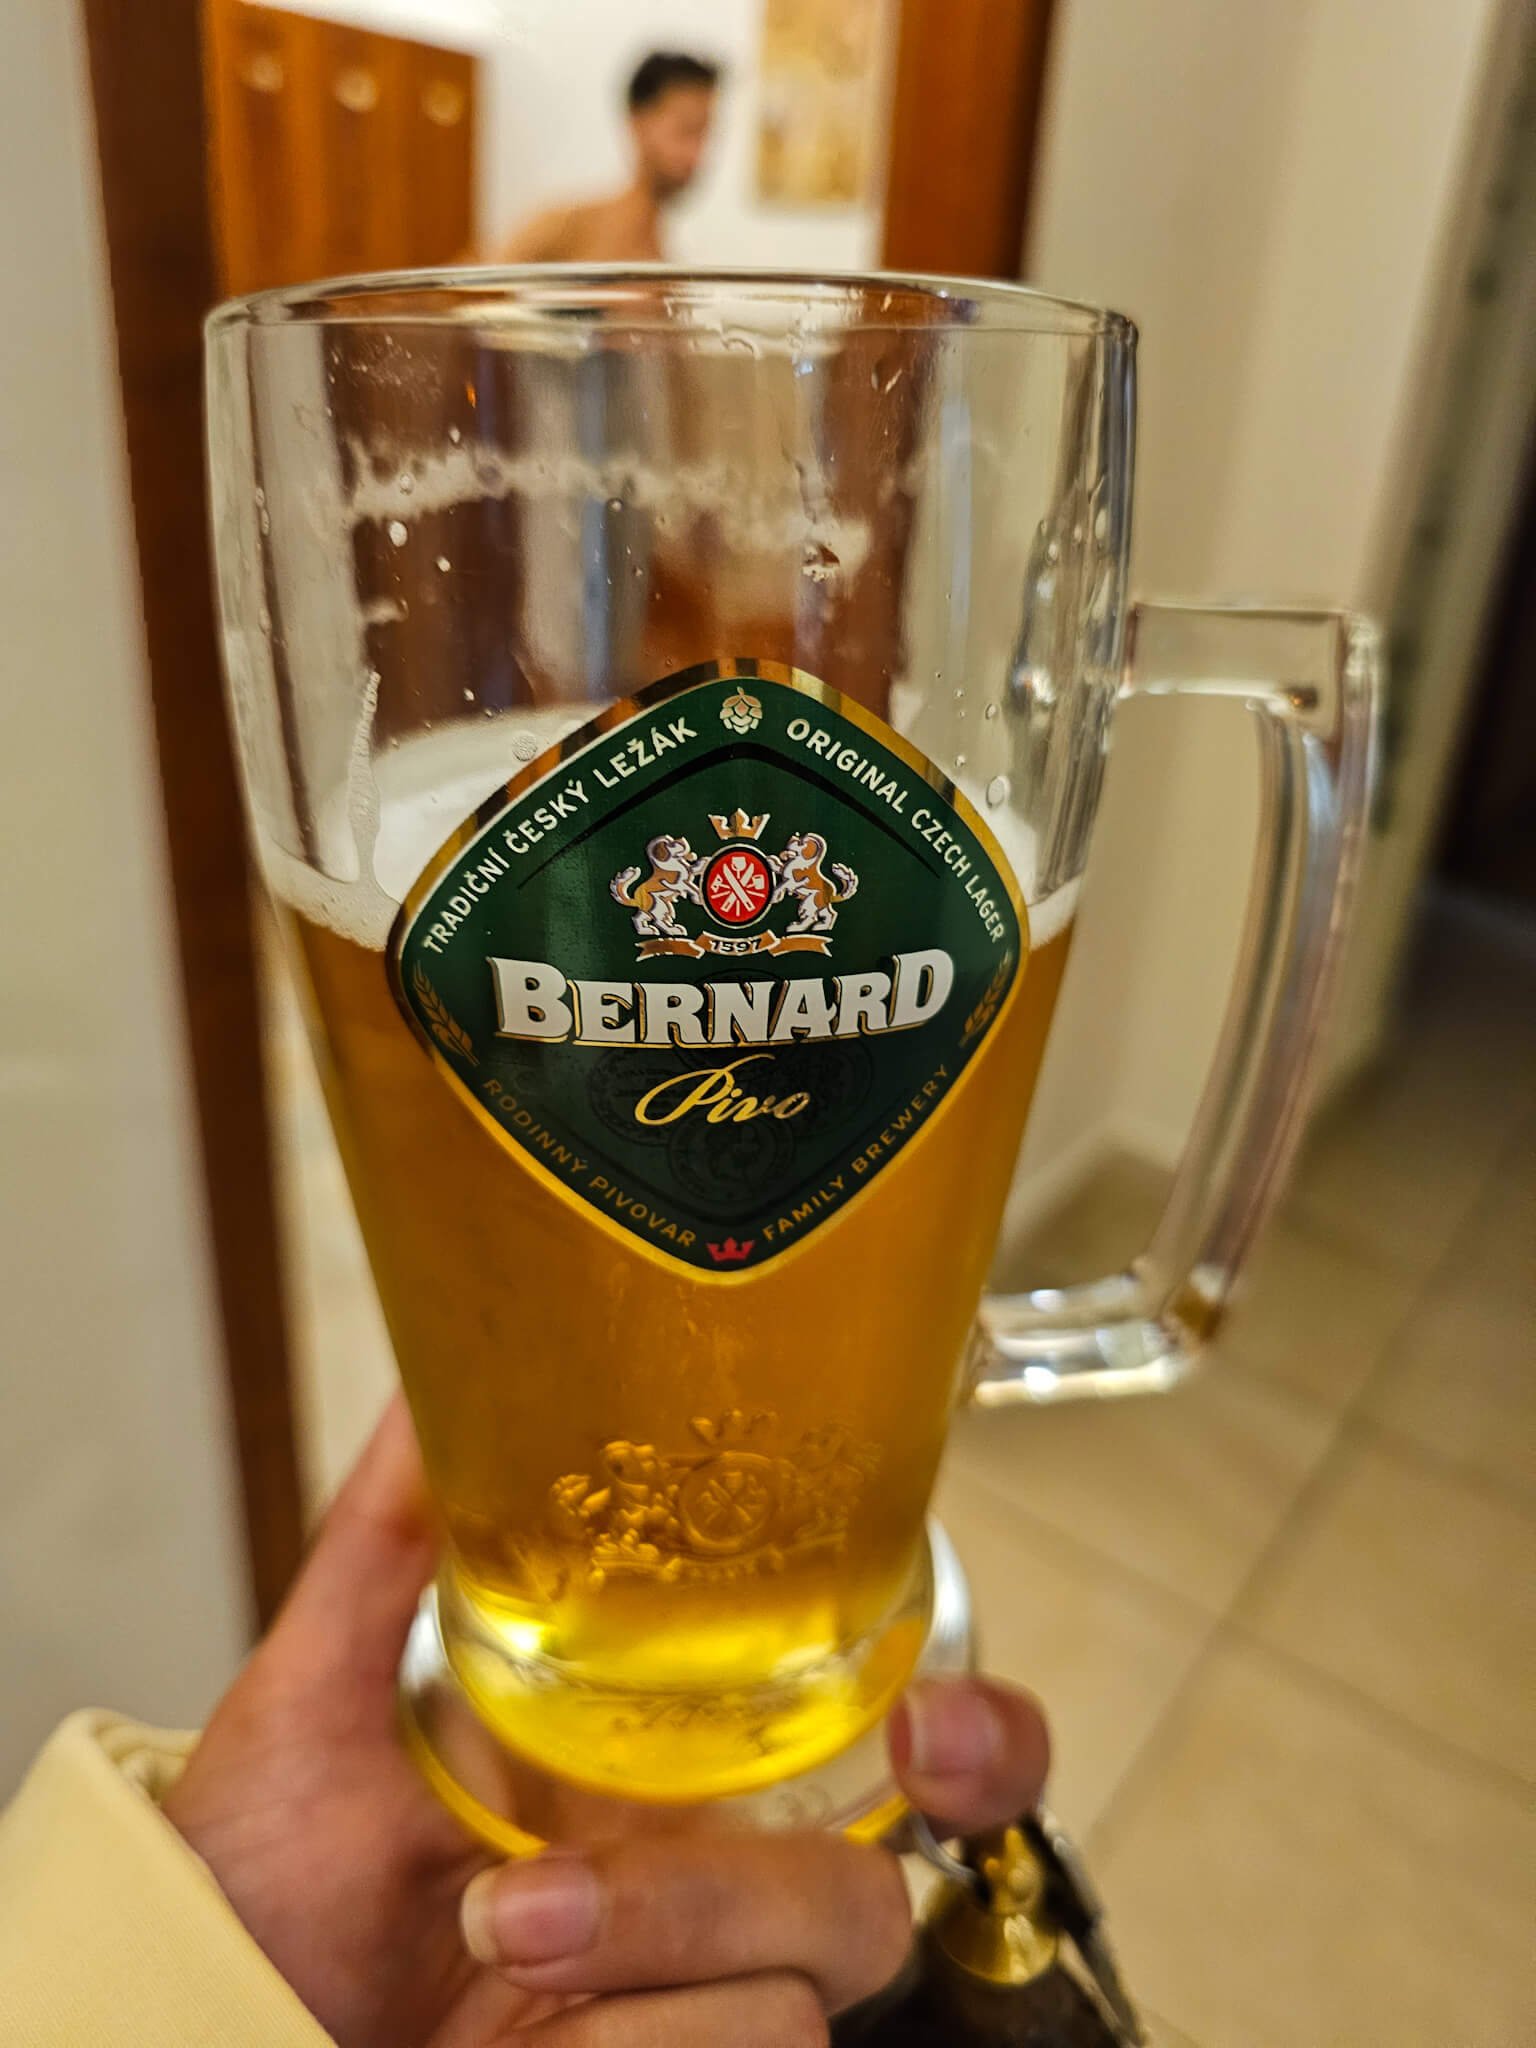 Bernard beer spa, what to do in Prague in 1 day